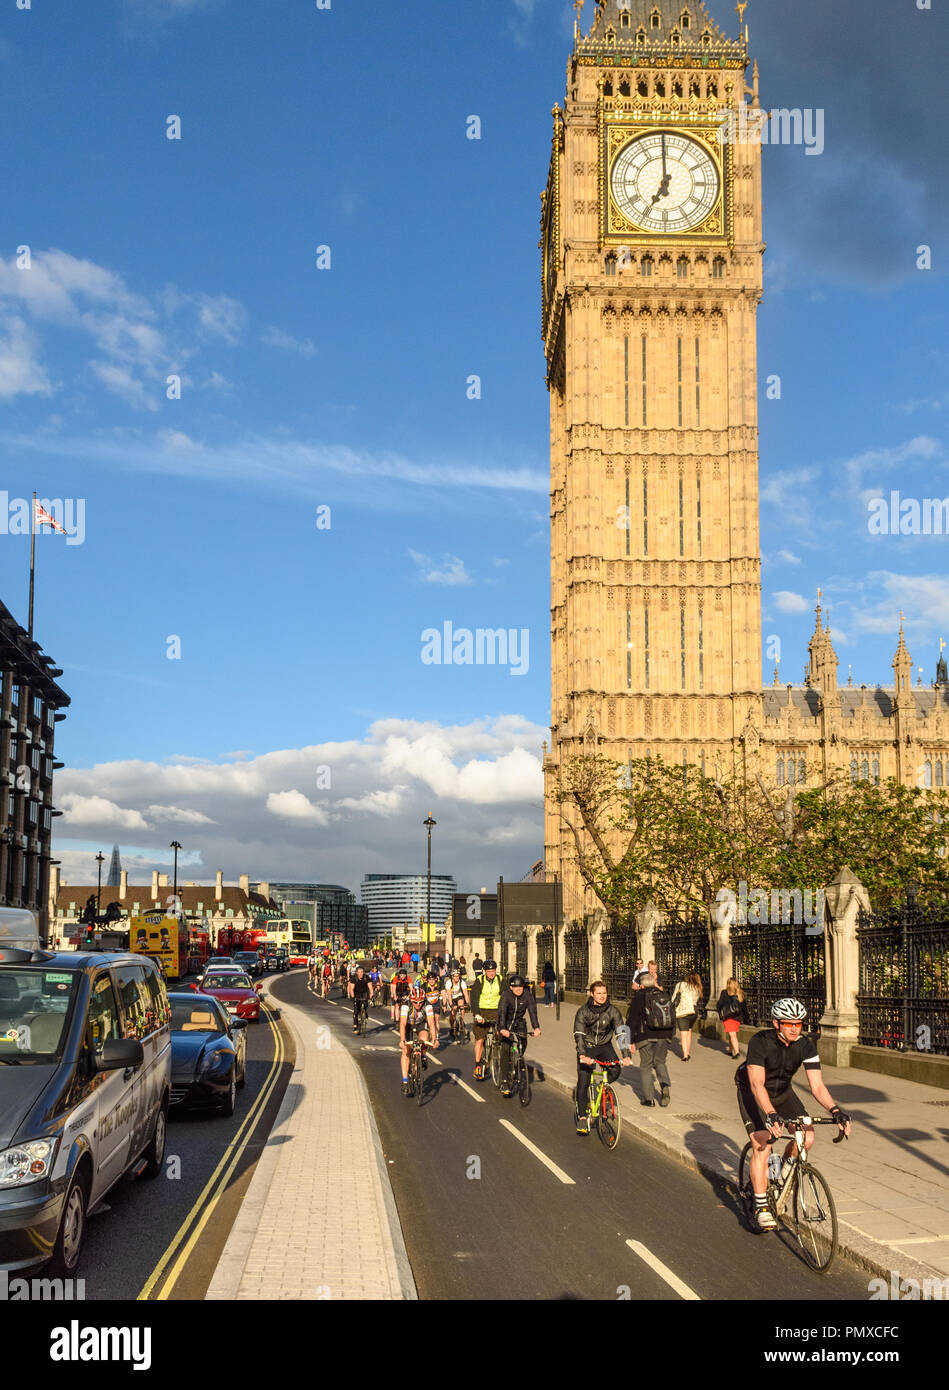 London, England - May 24, 2016: Cyclists pass the Big Ben clock tower of the Houses of Parliament on the nearly opened East-West Cycle Superhighway. Stock Photo